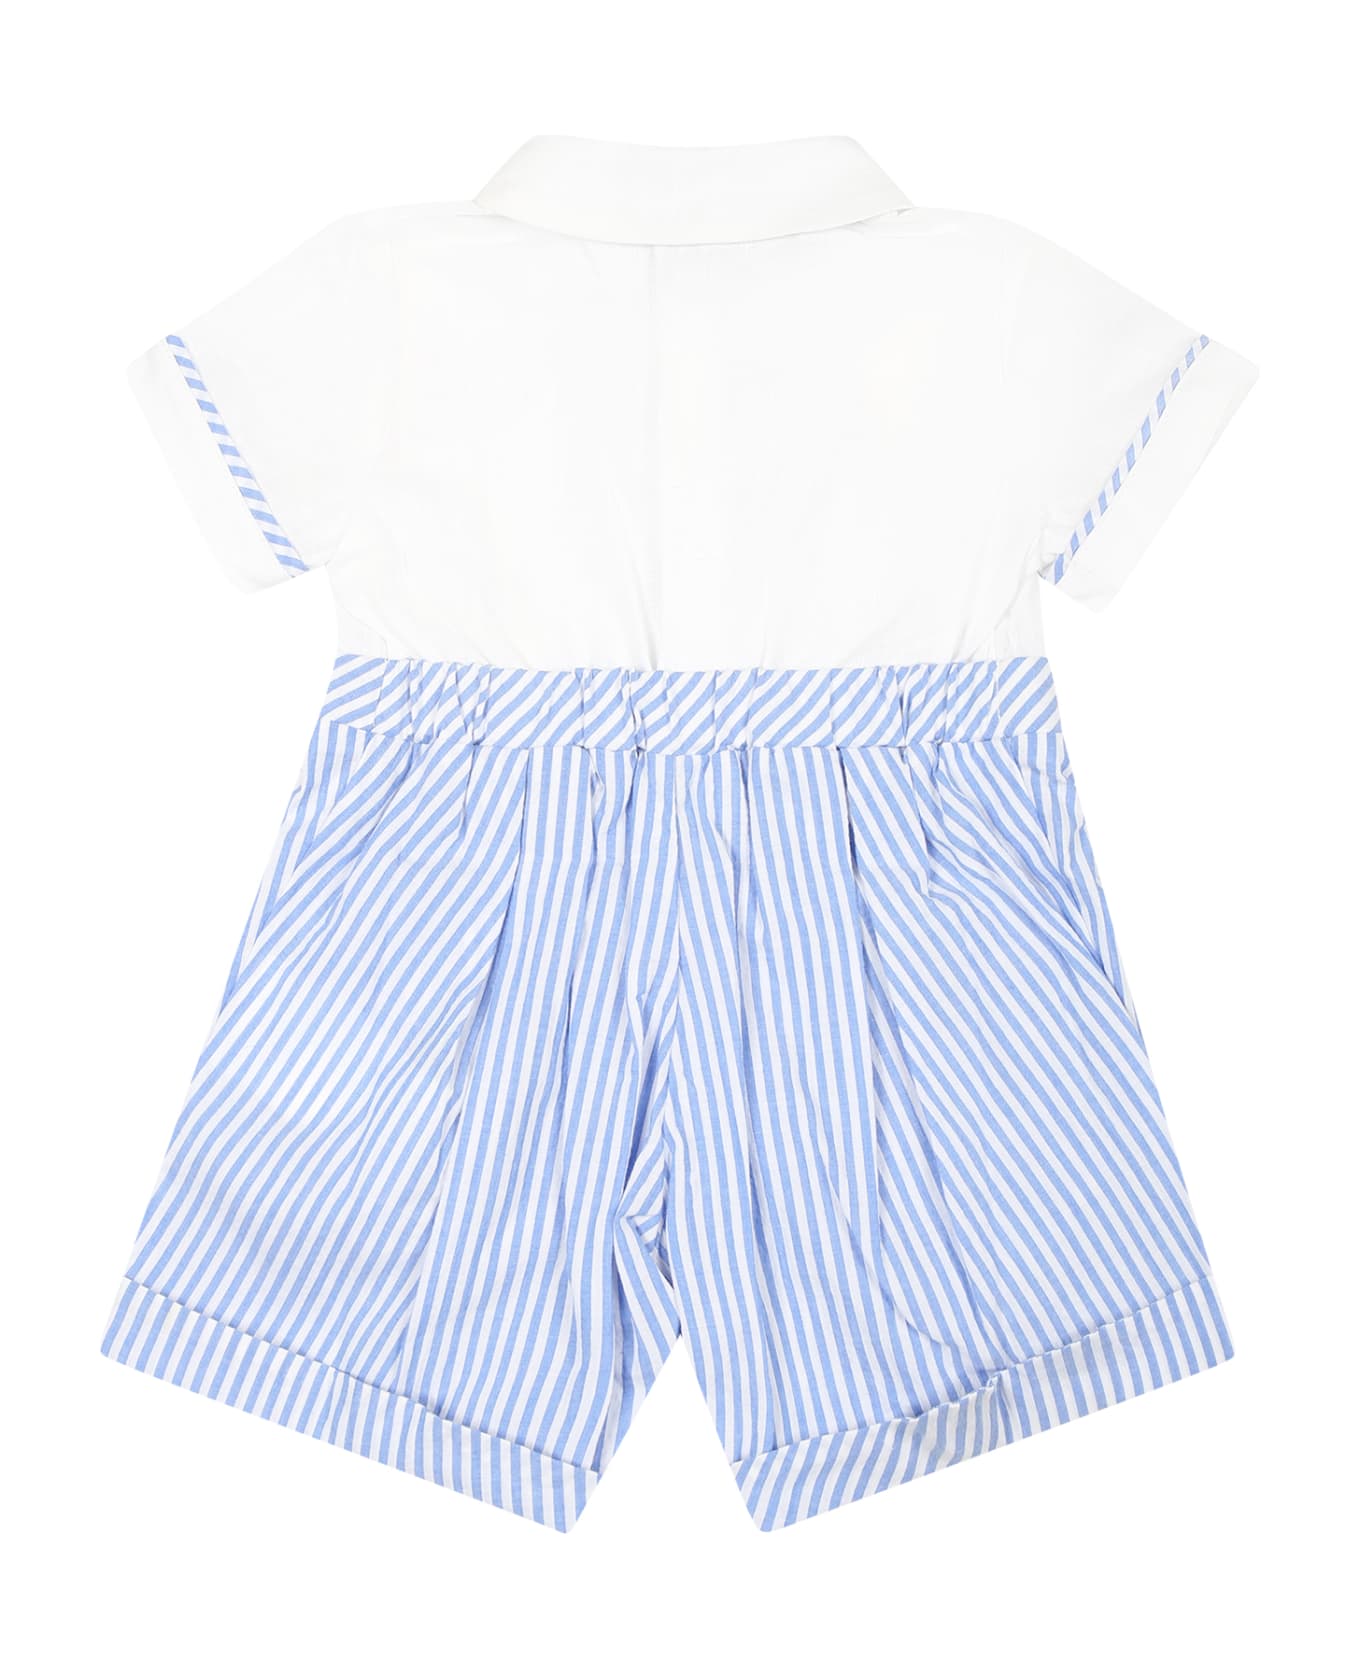 Monnalisa Light Blue Romper For Baby Boy With Bow Tie - White